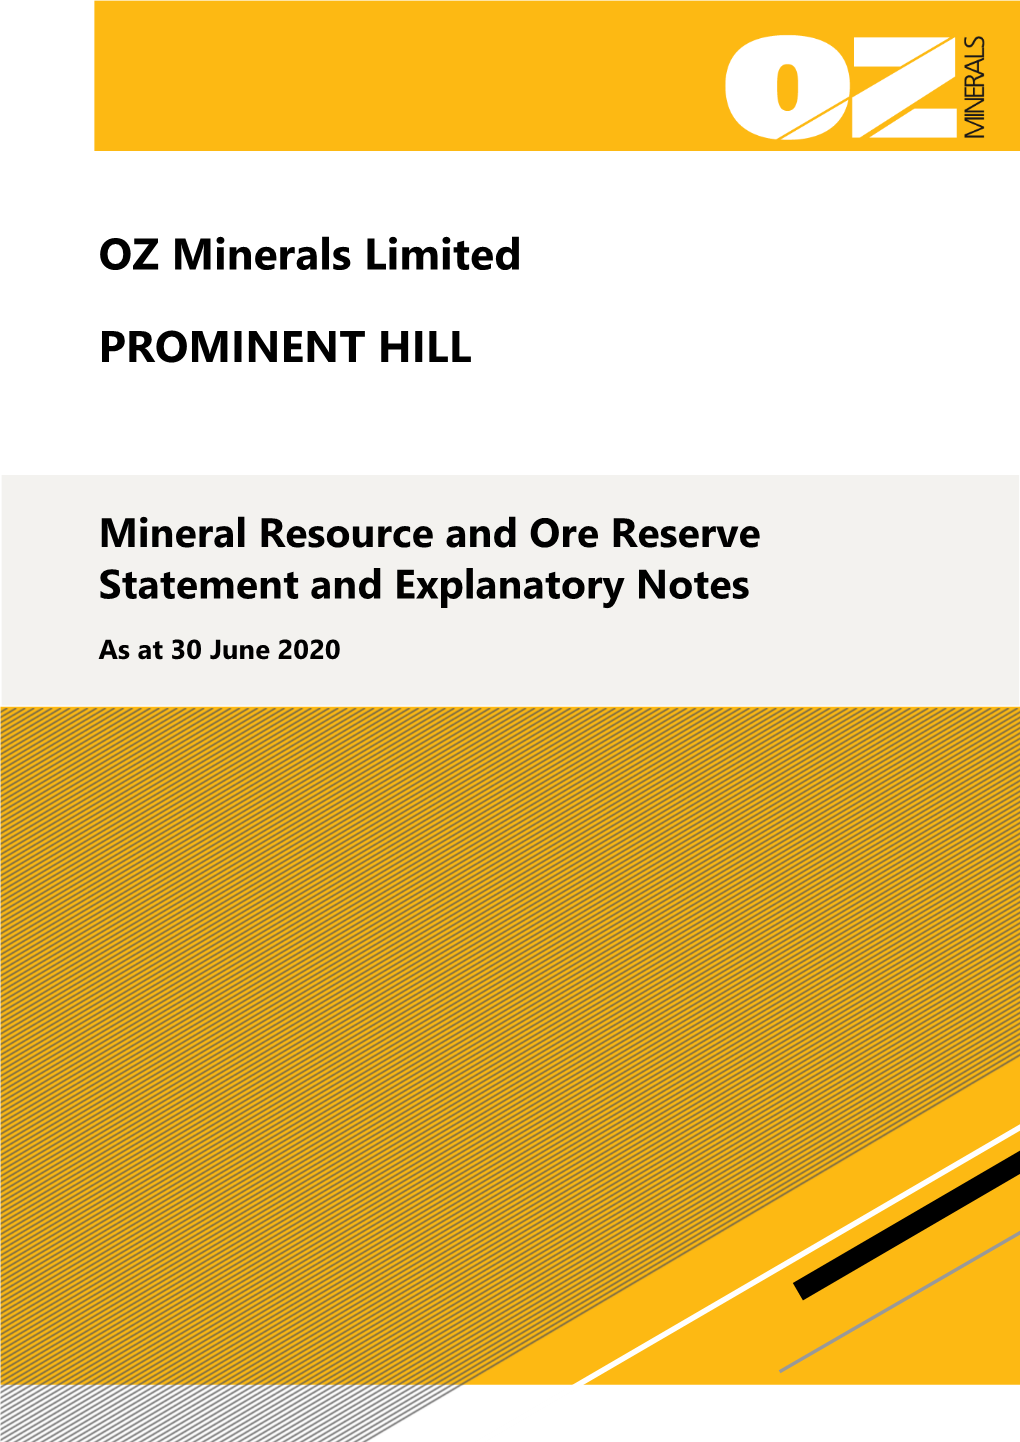 Prominent Hill Mineral Resource and Ore Reserve Statement and Explanatory Notes As at 30 June 2020